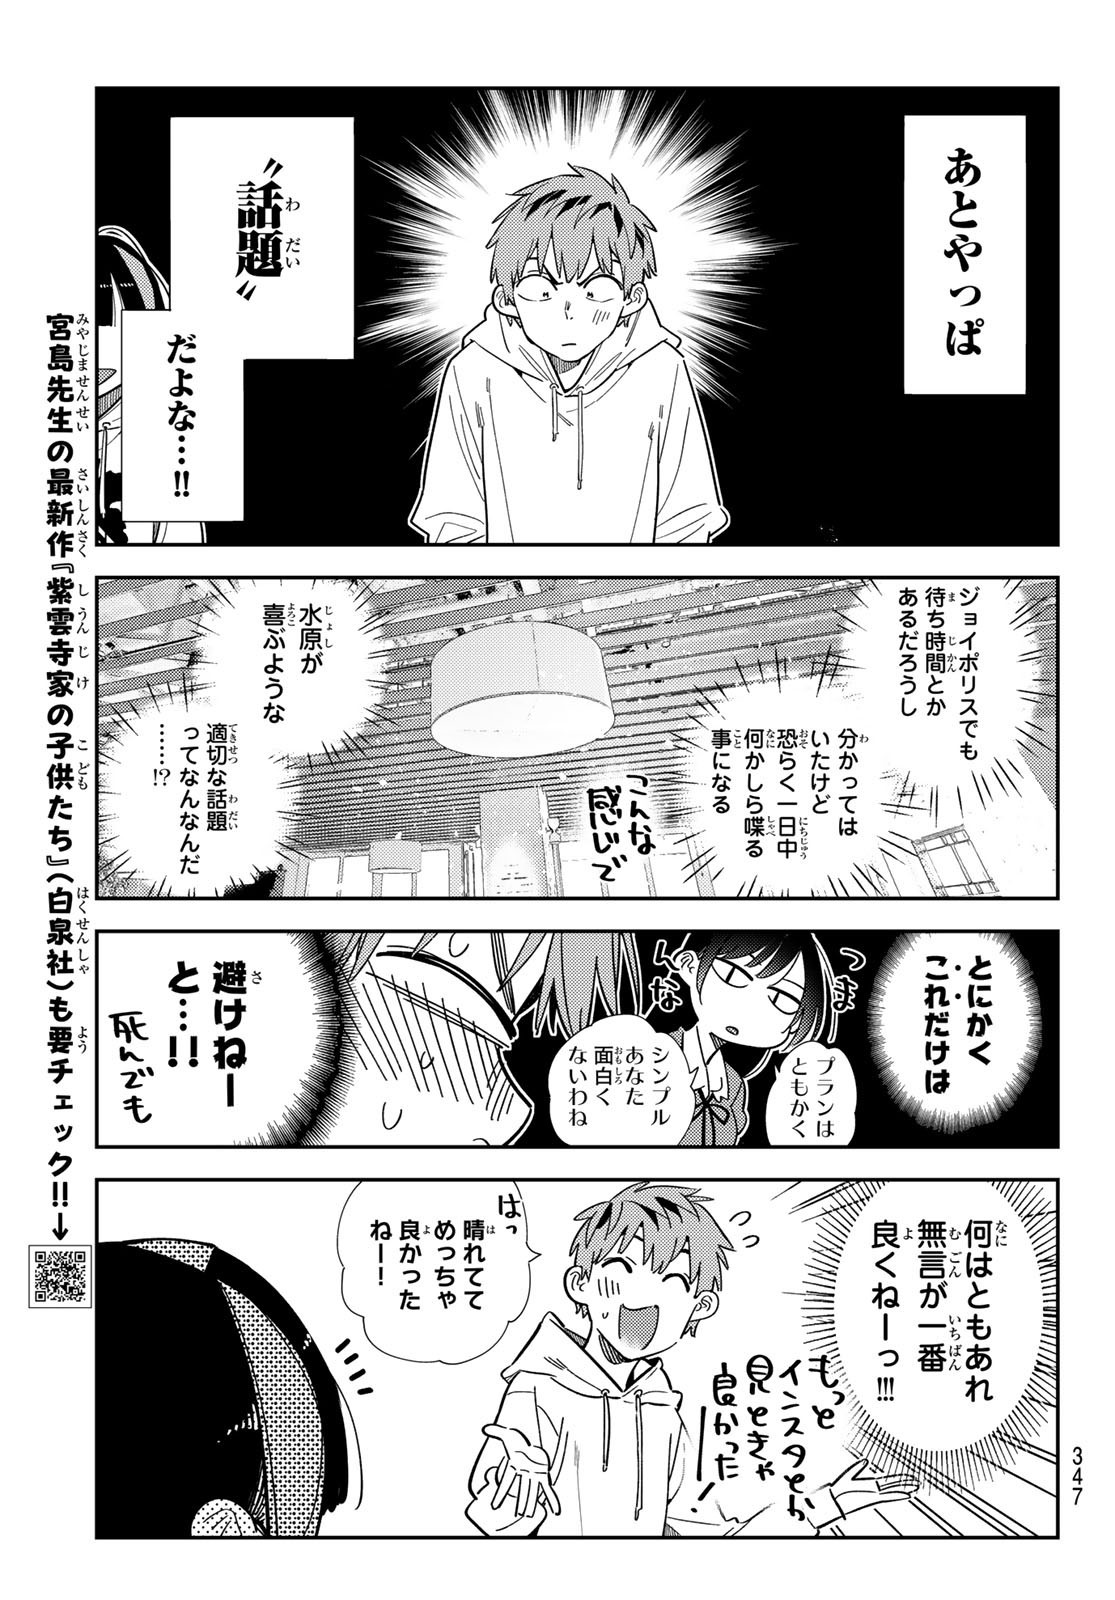 Weekly Shōnen Magazine - 週刊少年マガジン - Chapter 2024-32 - Page 345